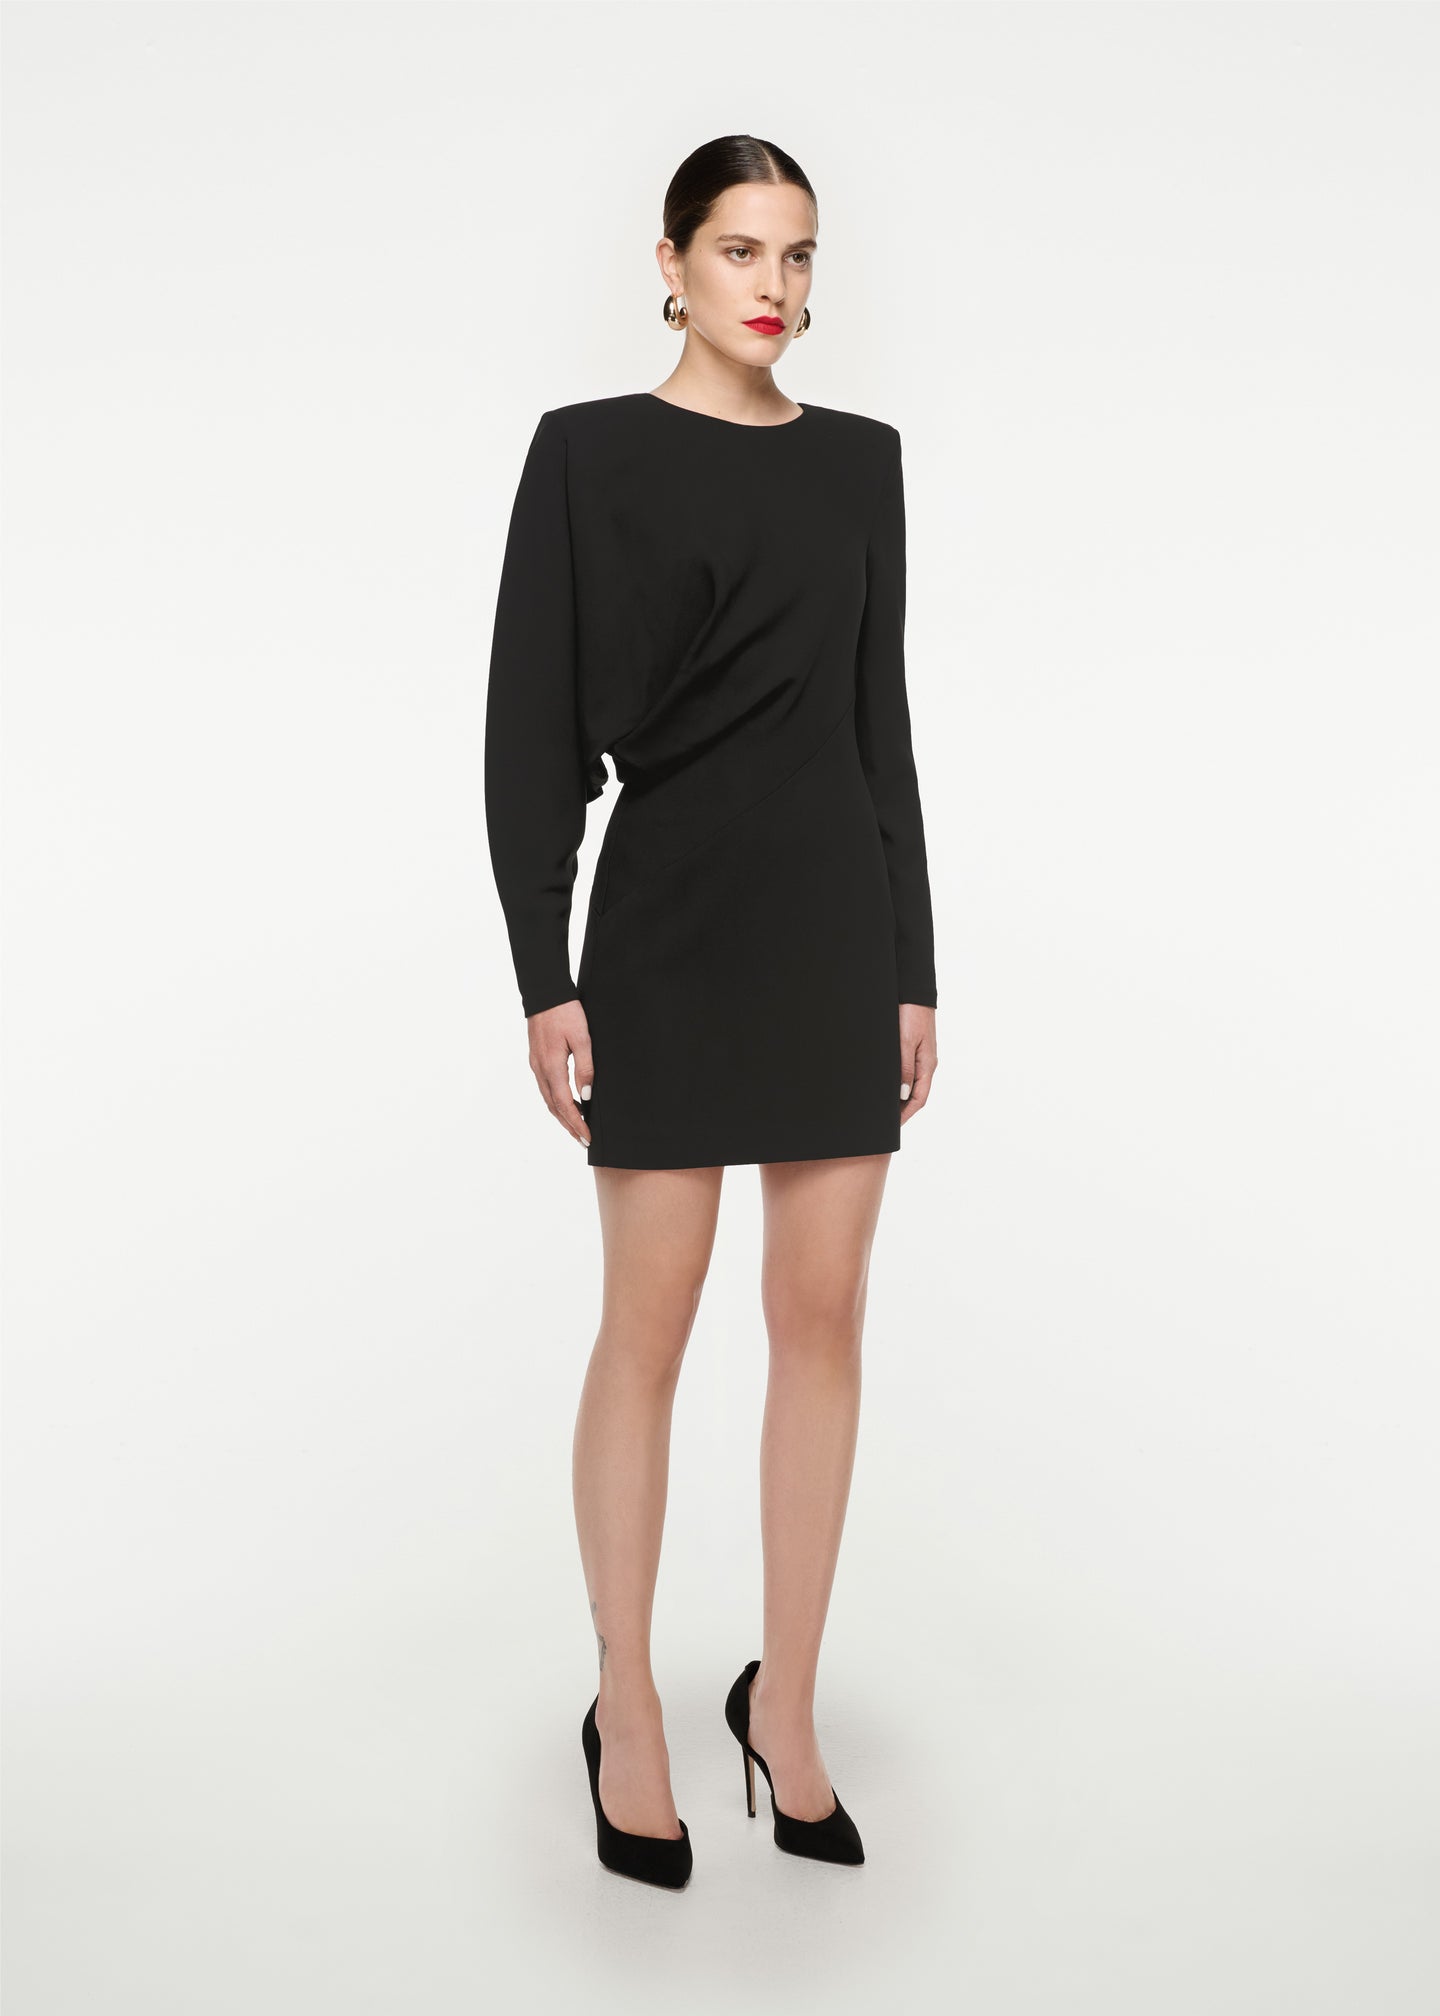 Woman wearing the Long Sleeve Stretch Cady Mini Dress in Black